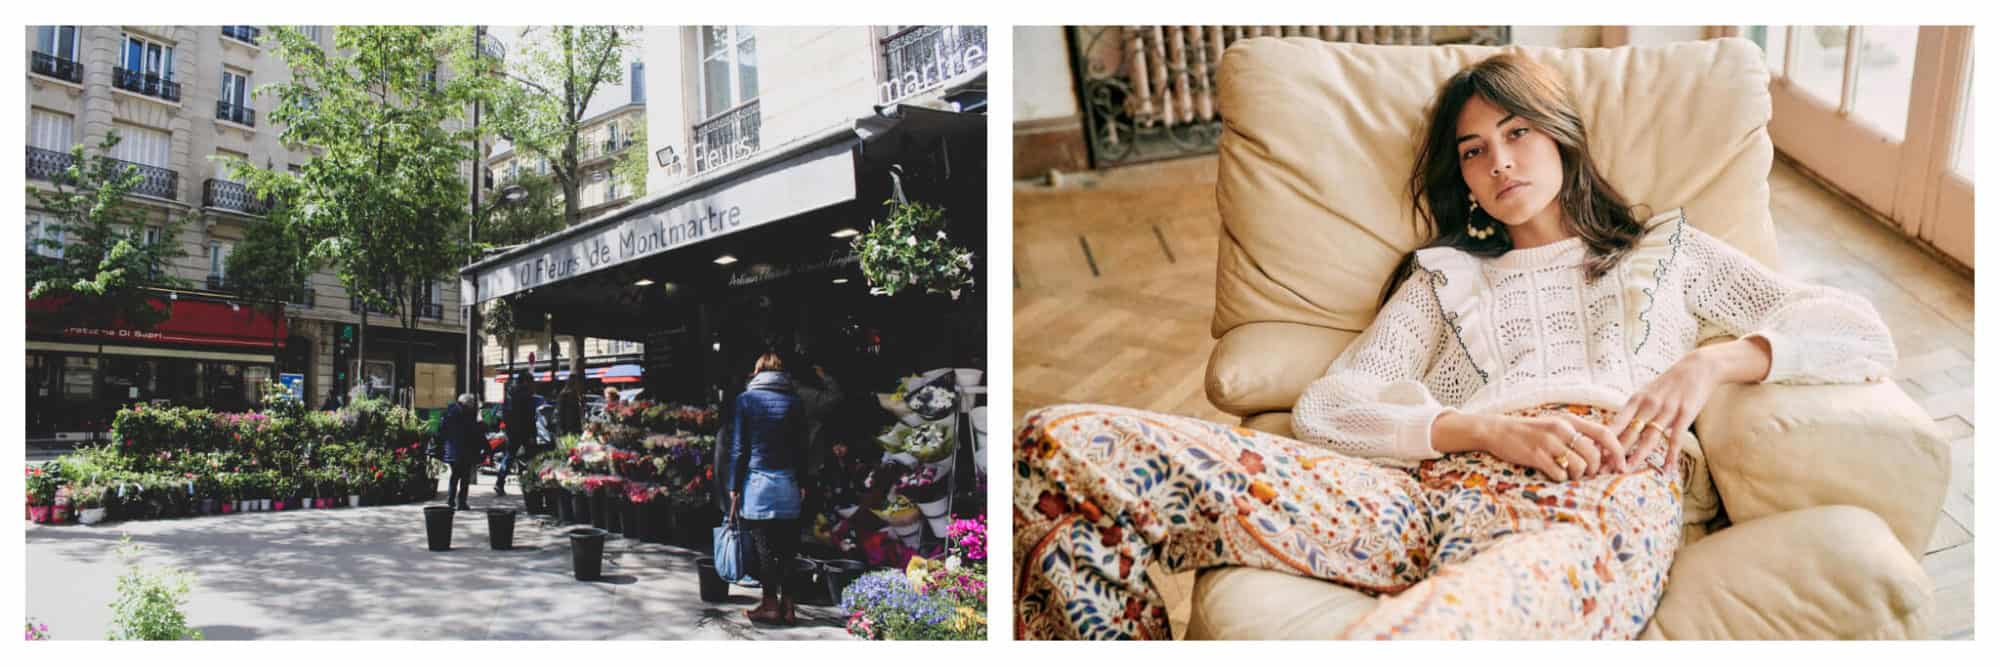 Left, flower shop in Paris springtime. Right, a girl sprawled in a leather armchair wearing  Sézane outfit in Paris.